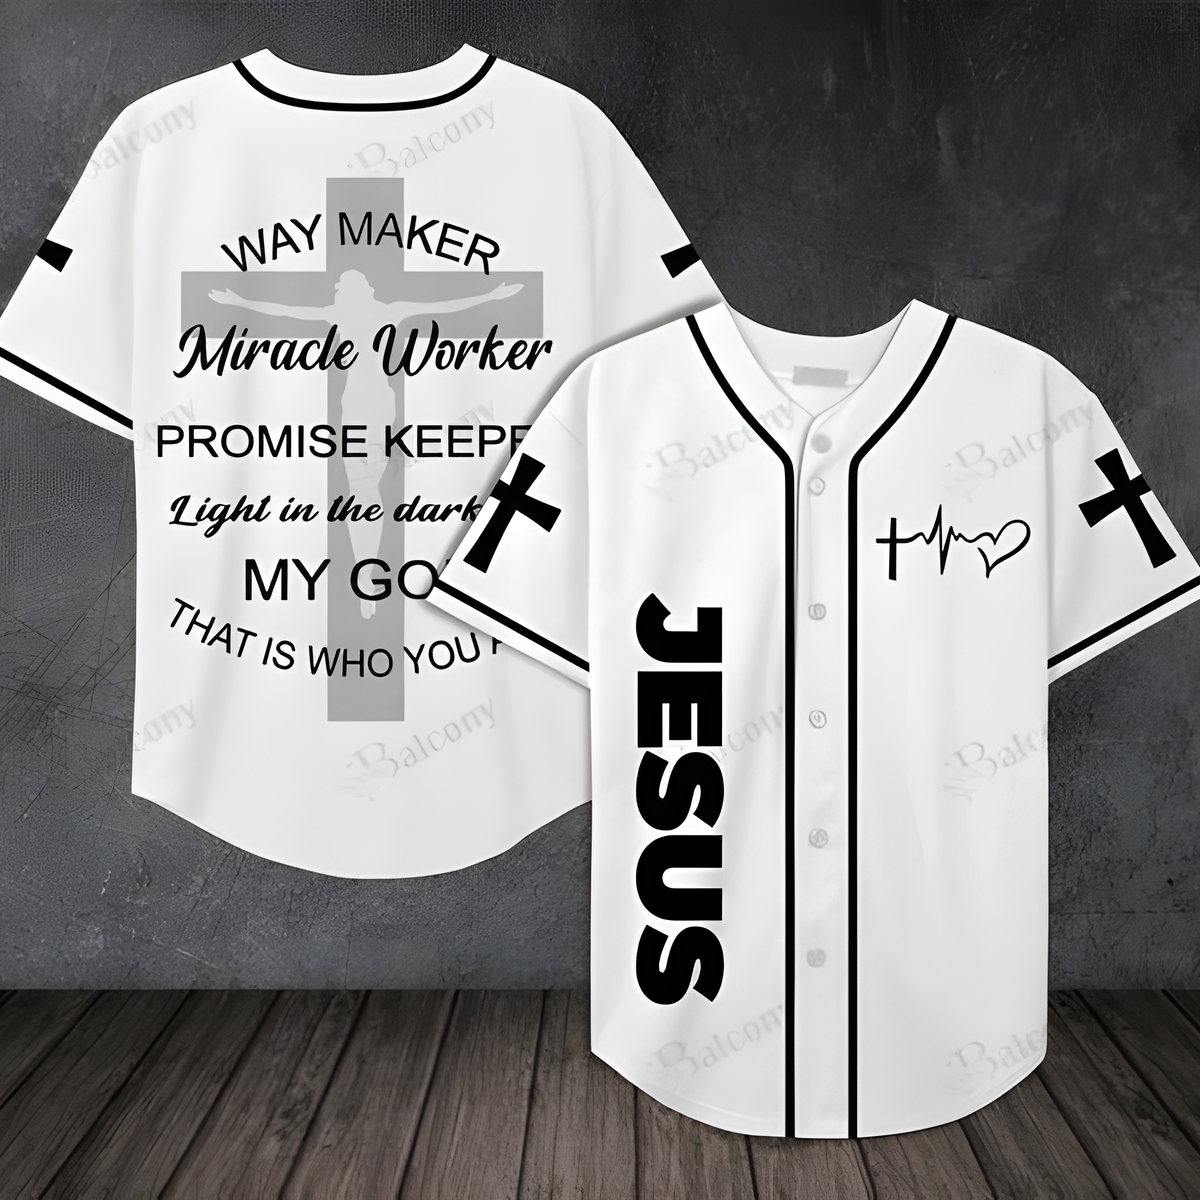 Jesus Christian Baseball Jersey Way Maker Promise Keeper Light In The Darkness Miracle Worker